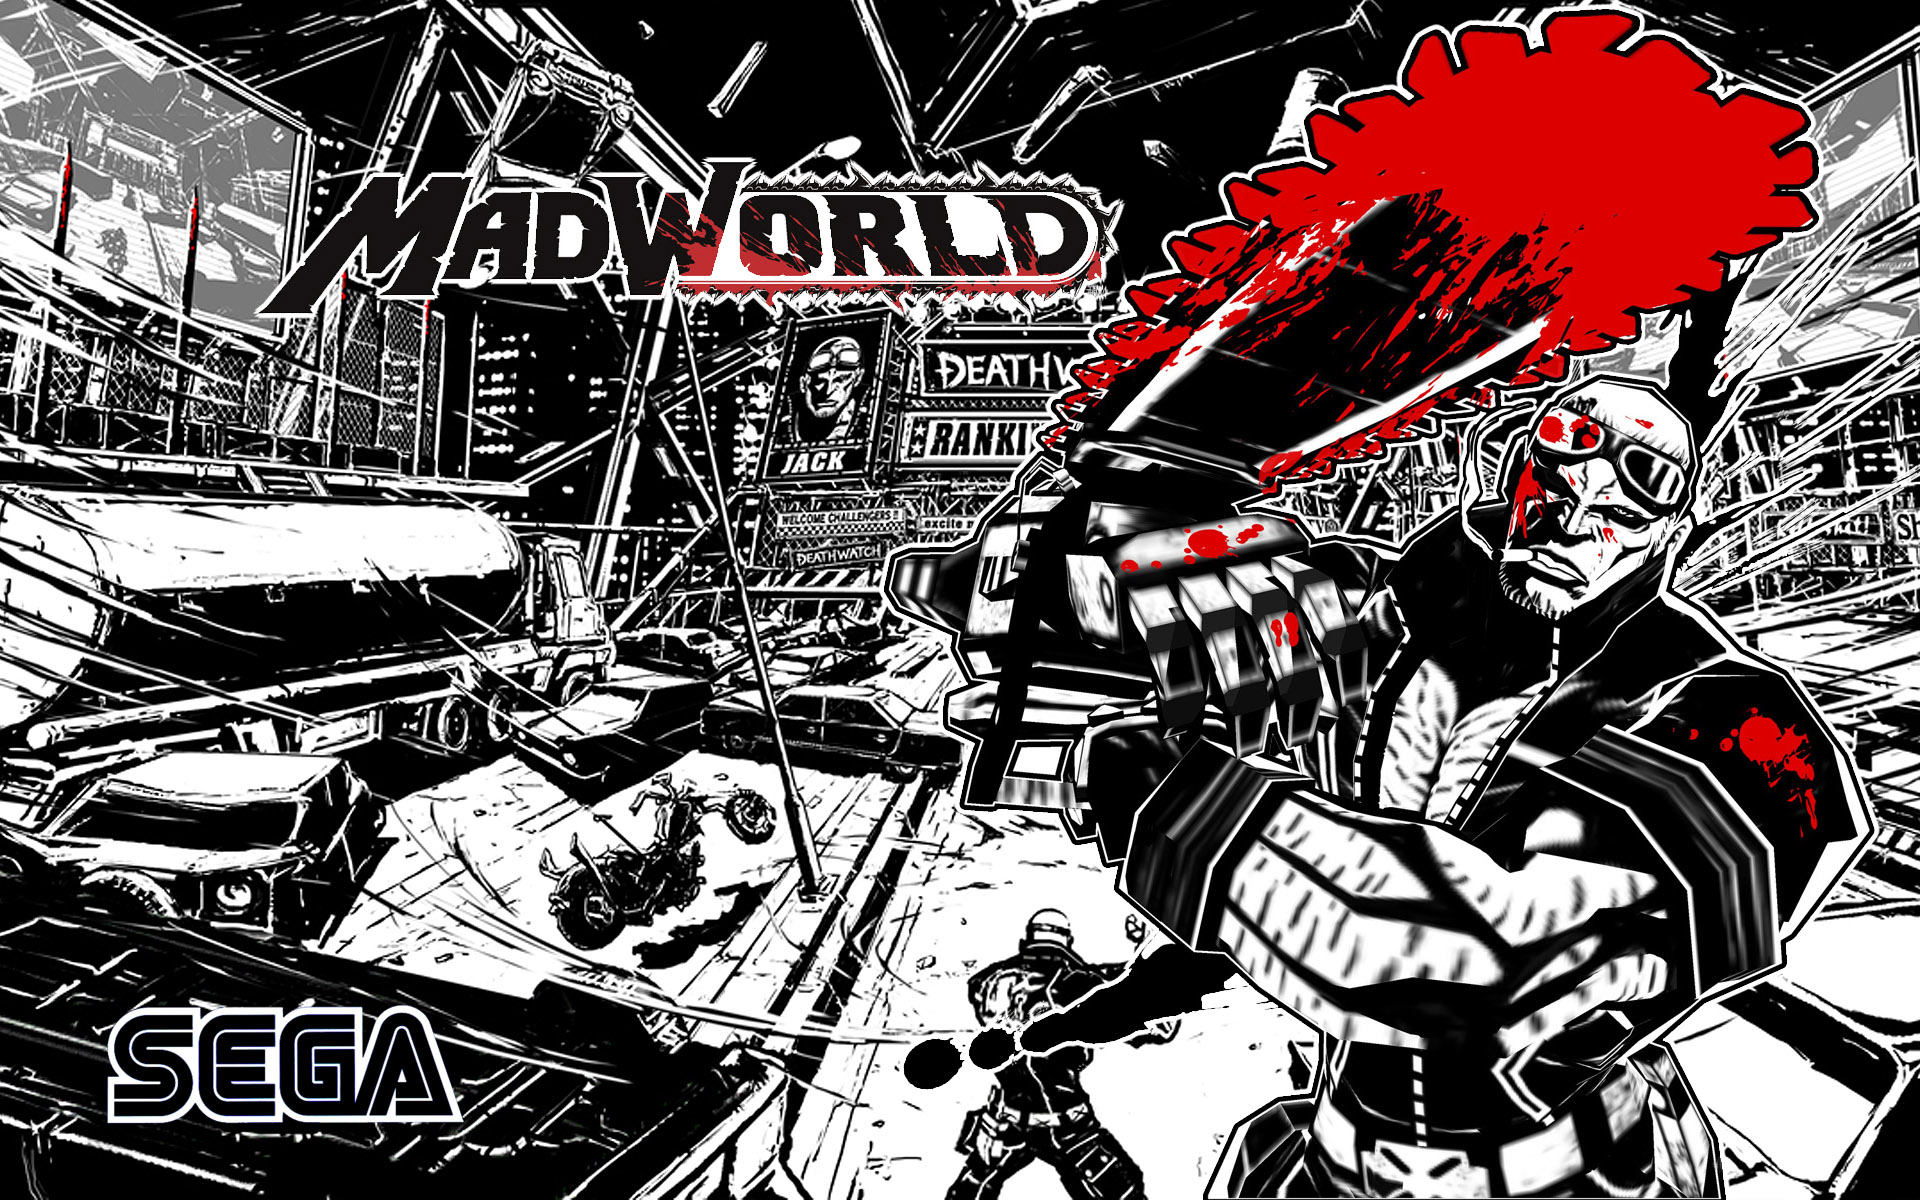 Mad World image - Video Game Art Realm.